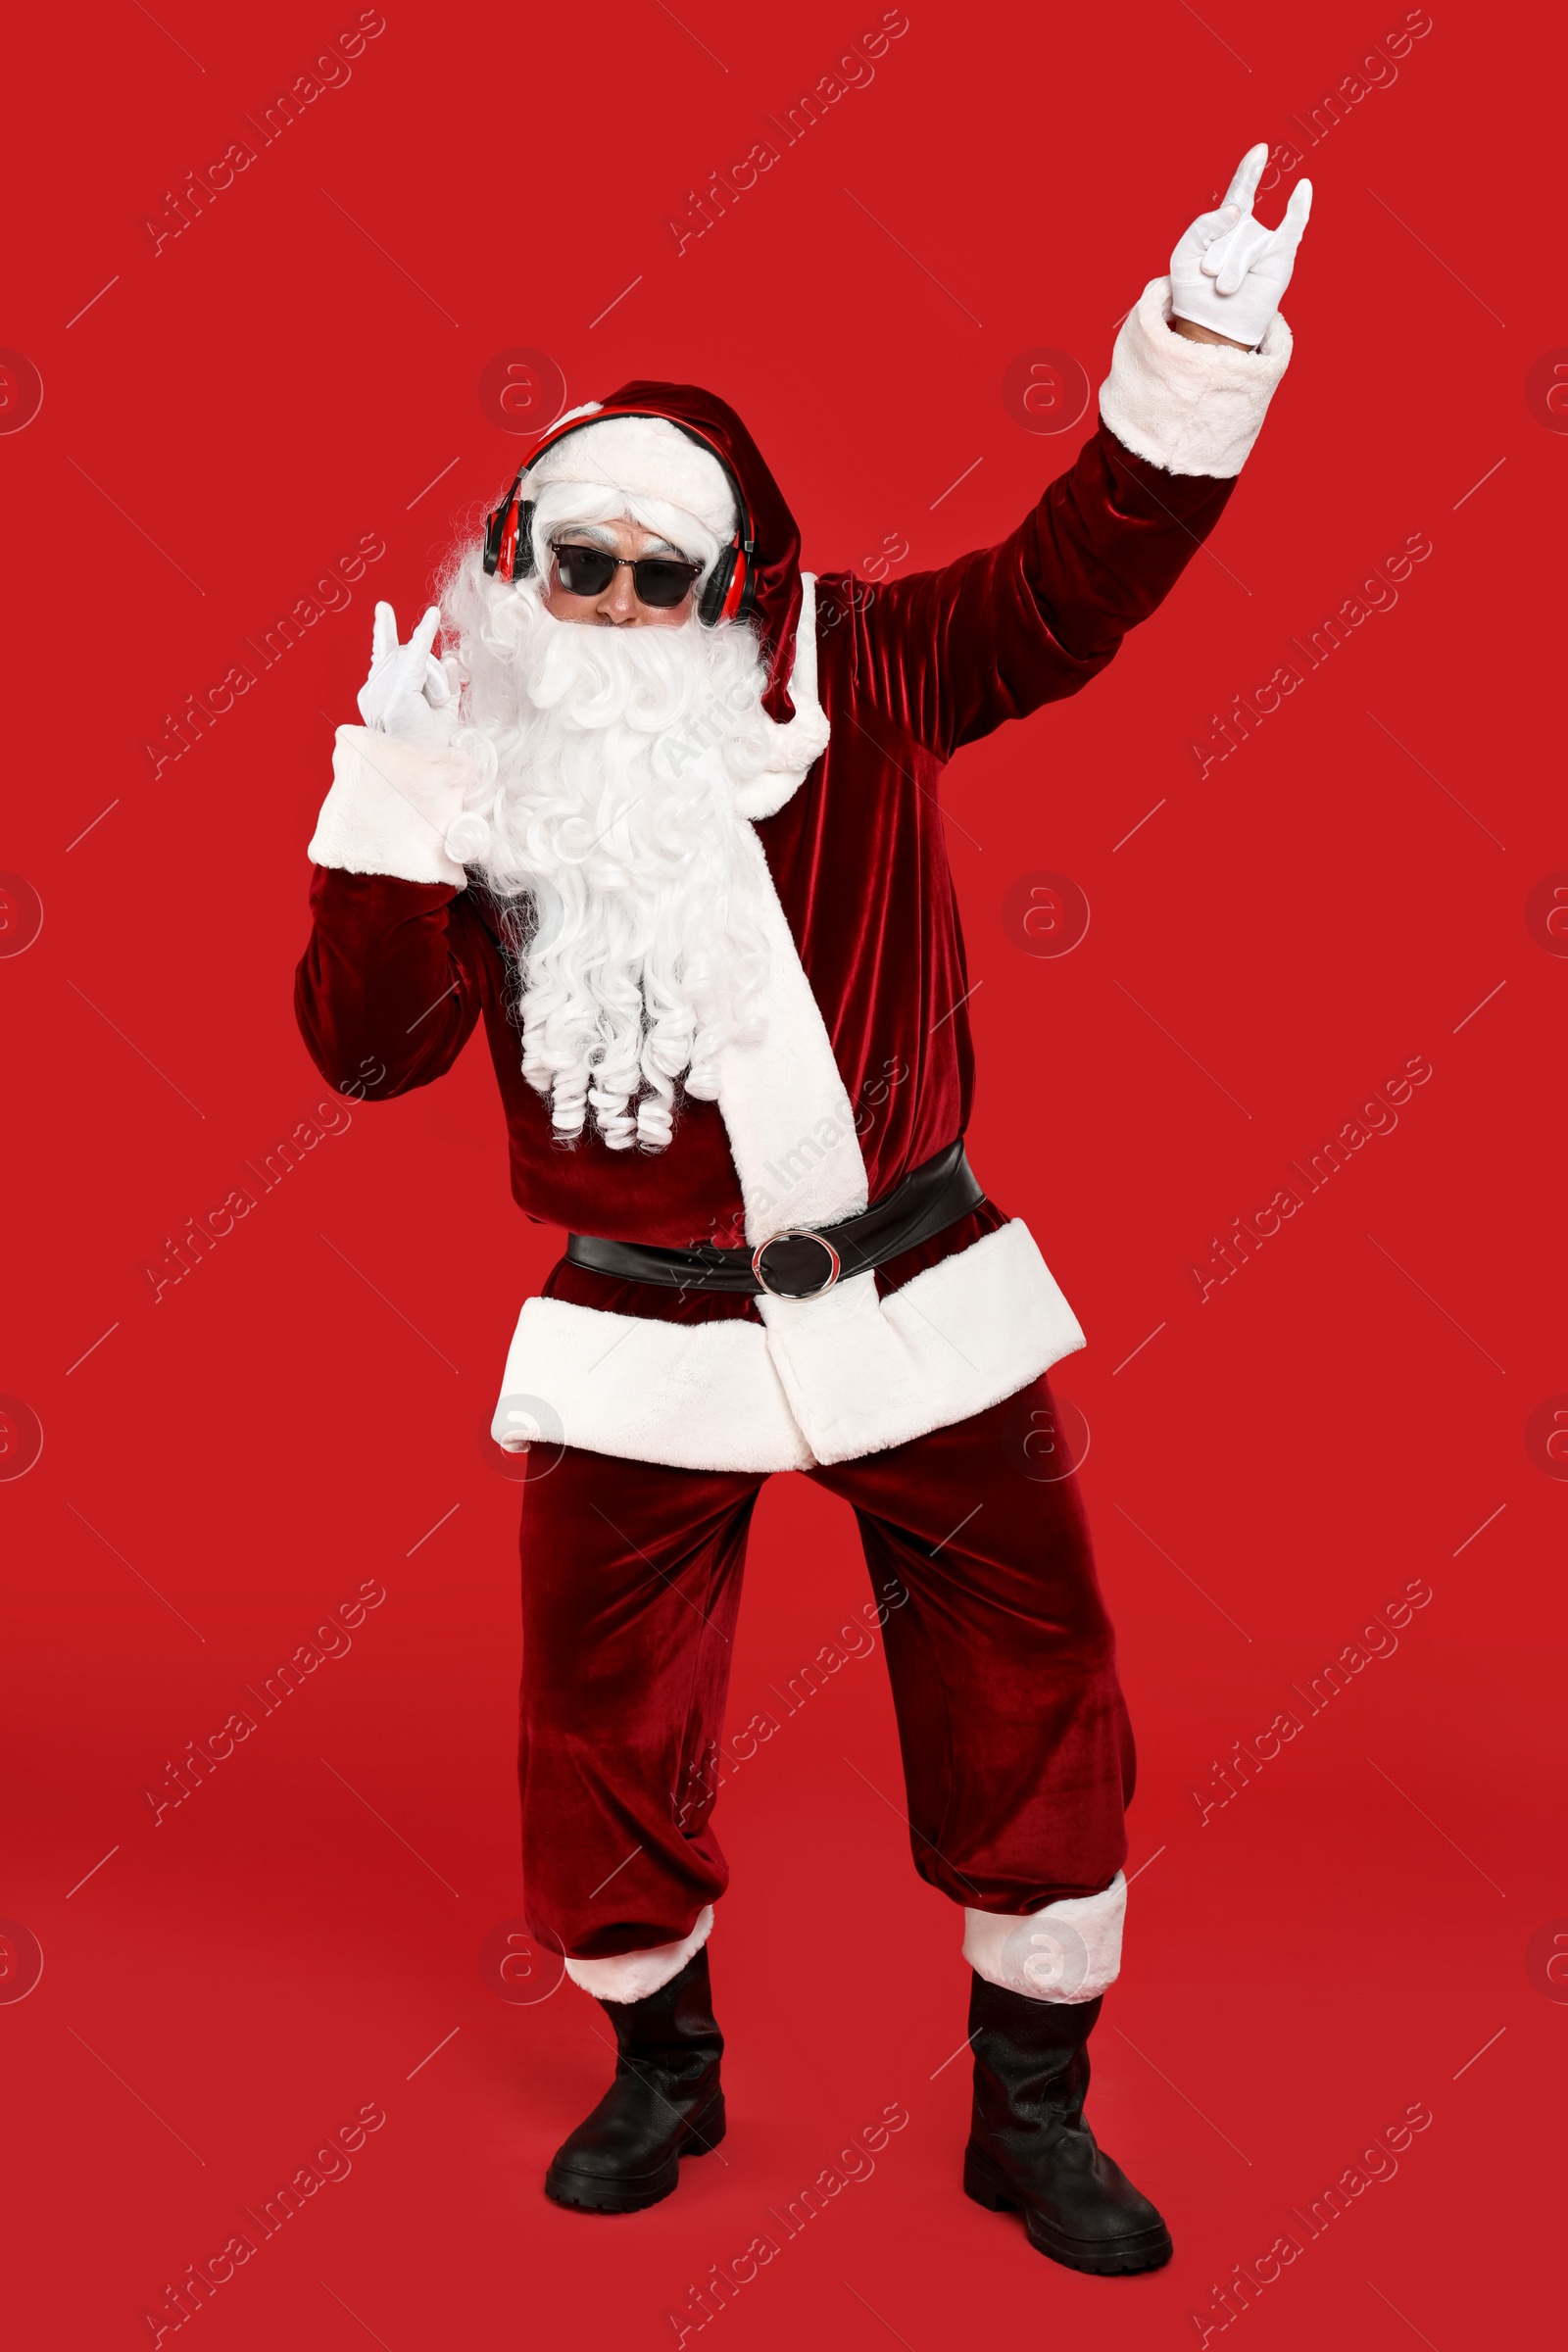 Photo of Santa Claus with headphones listening to Christmas music on red background